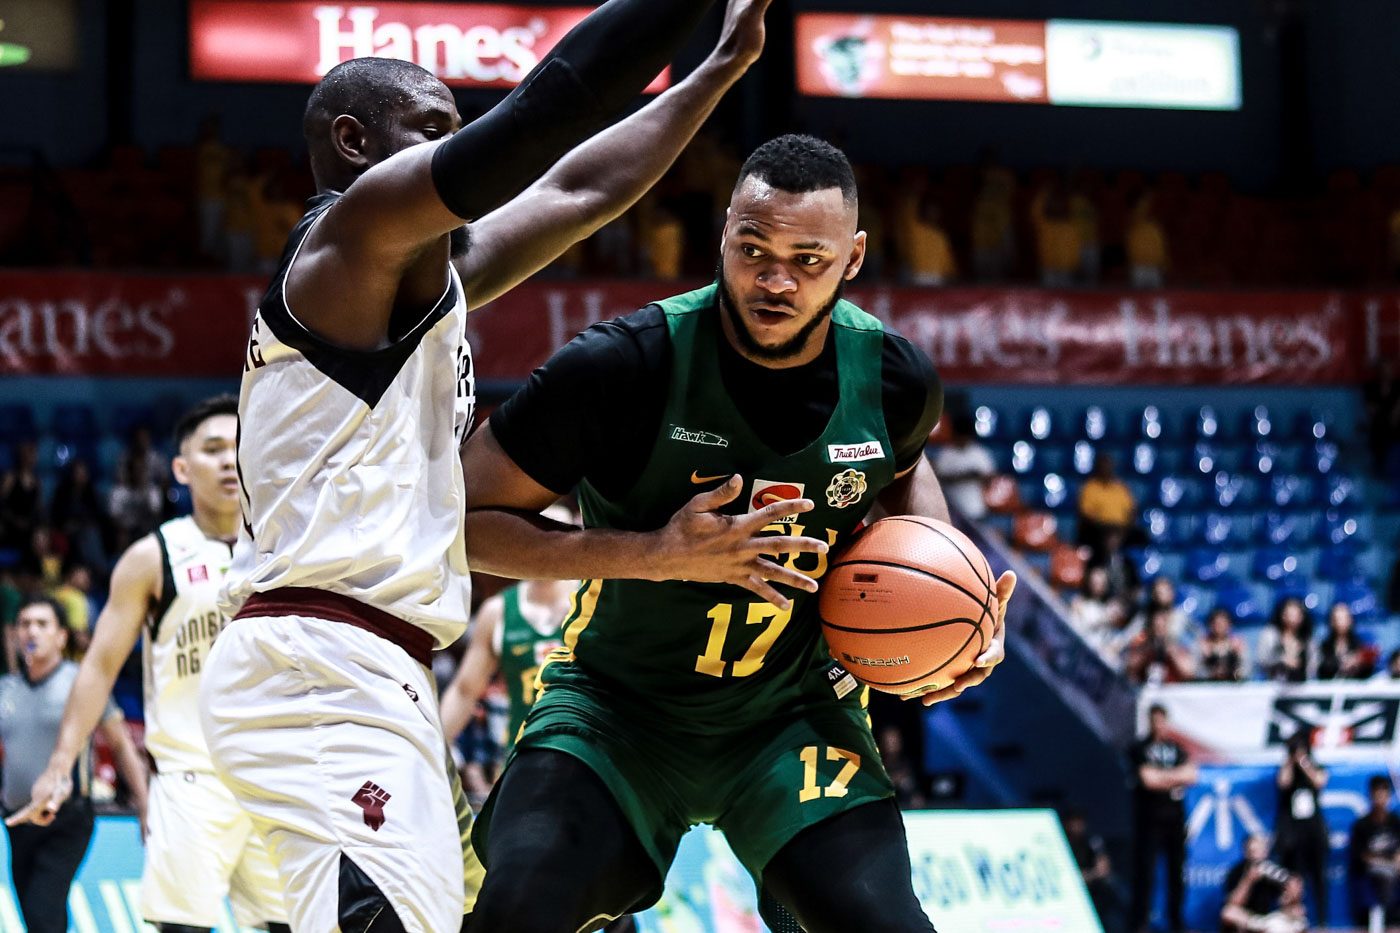 FEU flashes vaunted form after ‘needed loss’